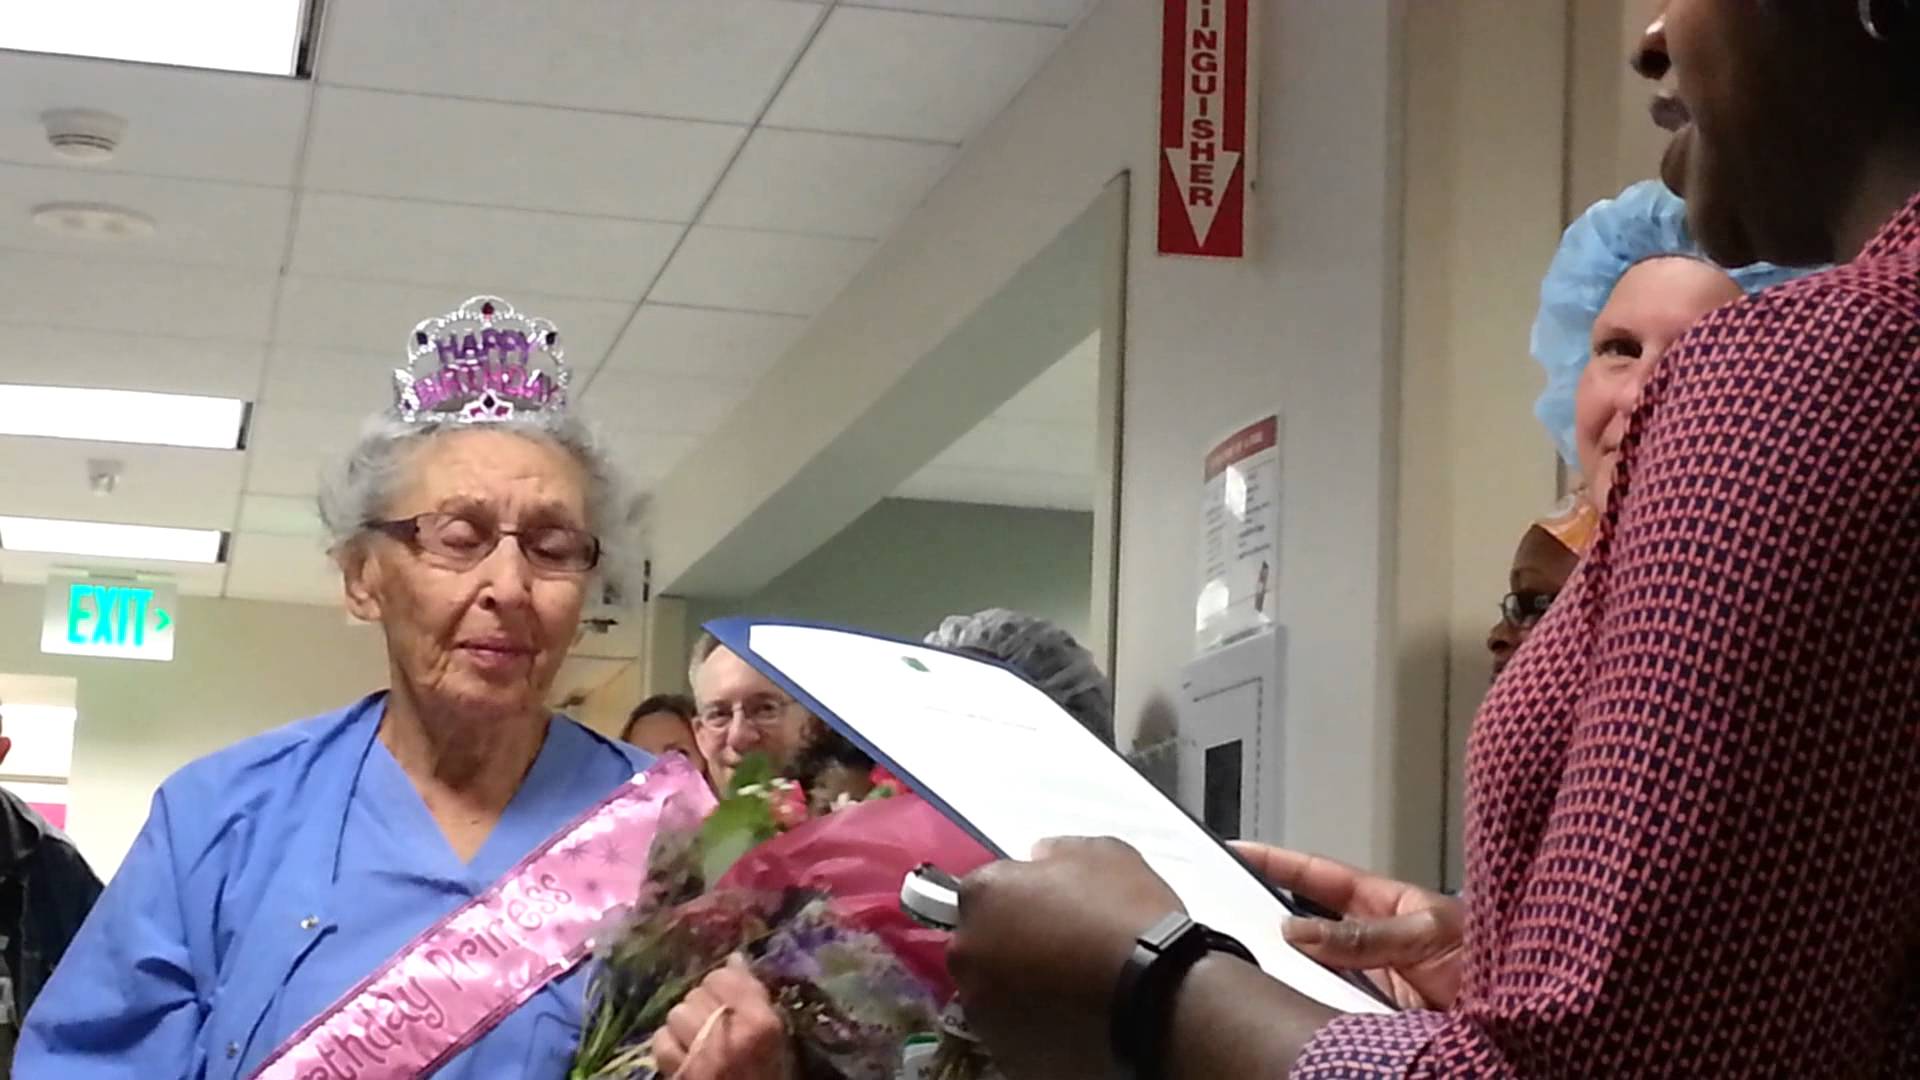 The Oldest Working Nurse in the United States Turns 90 and Still Going!